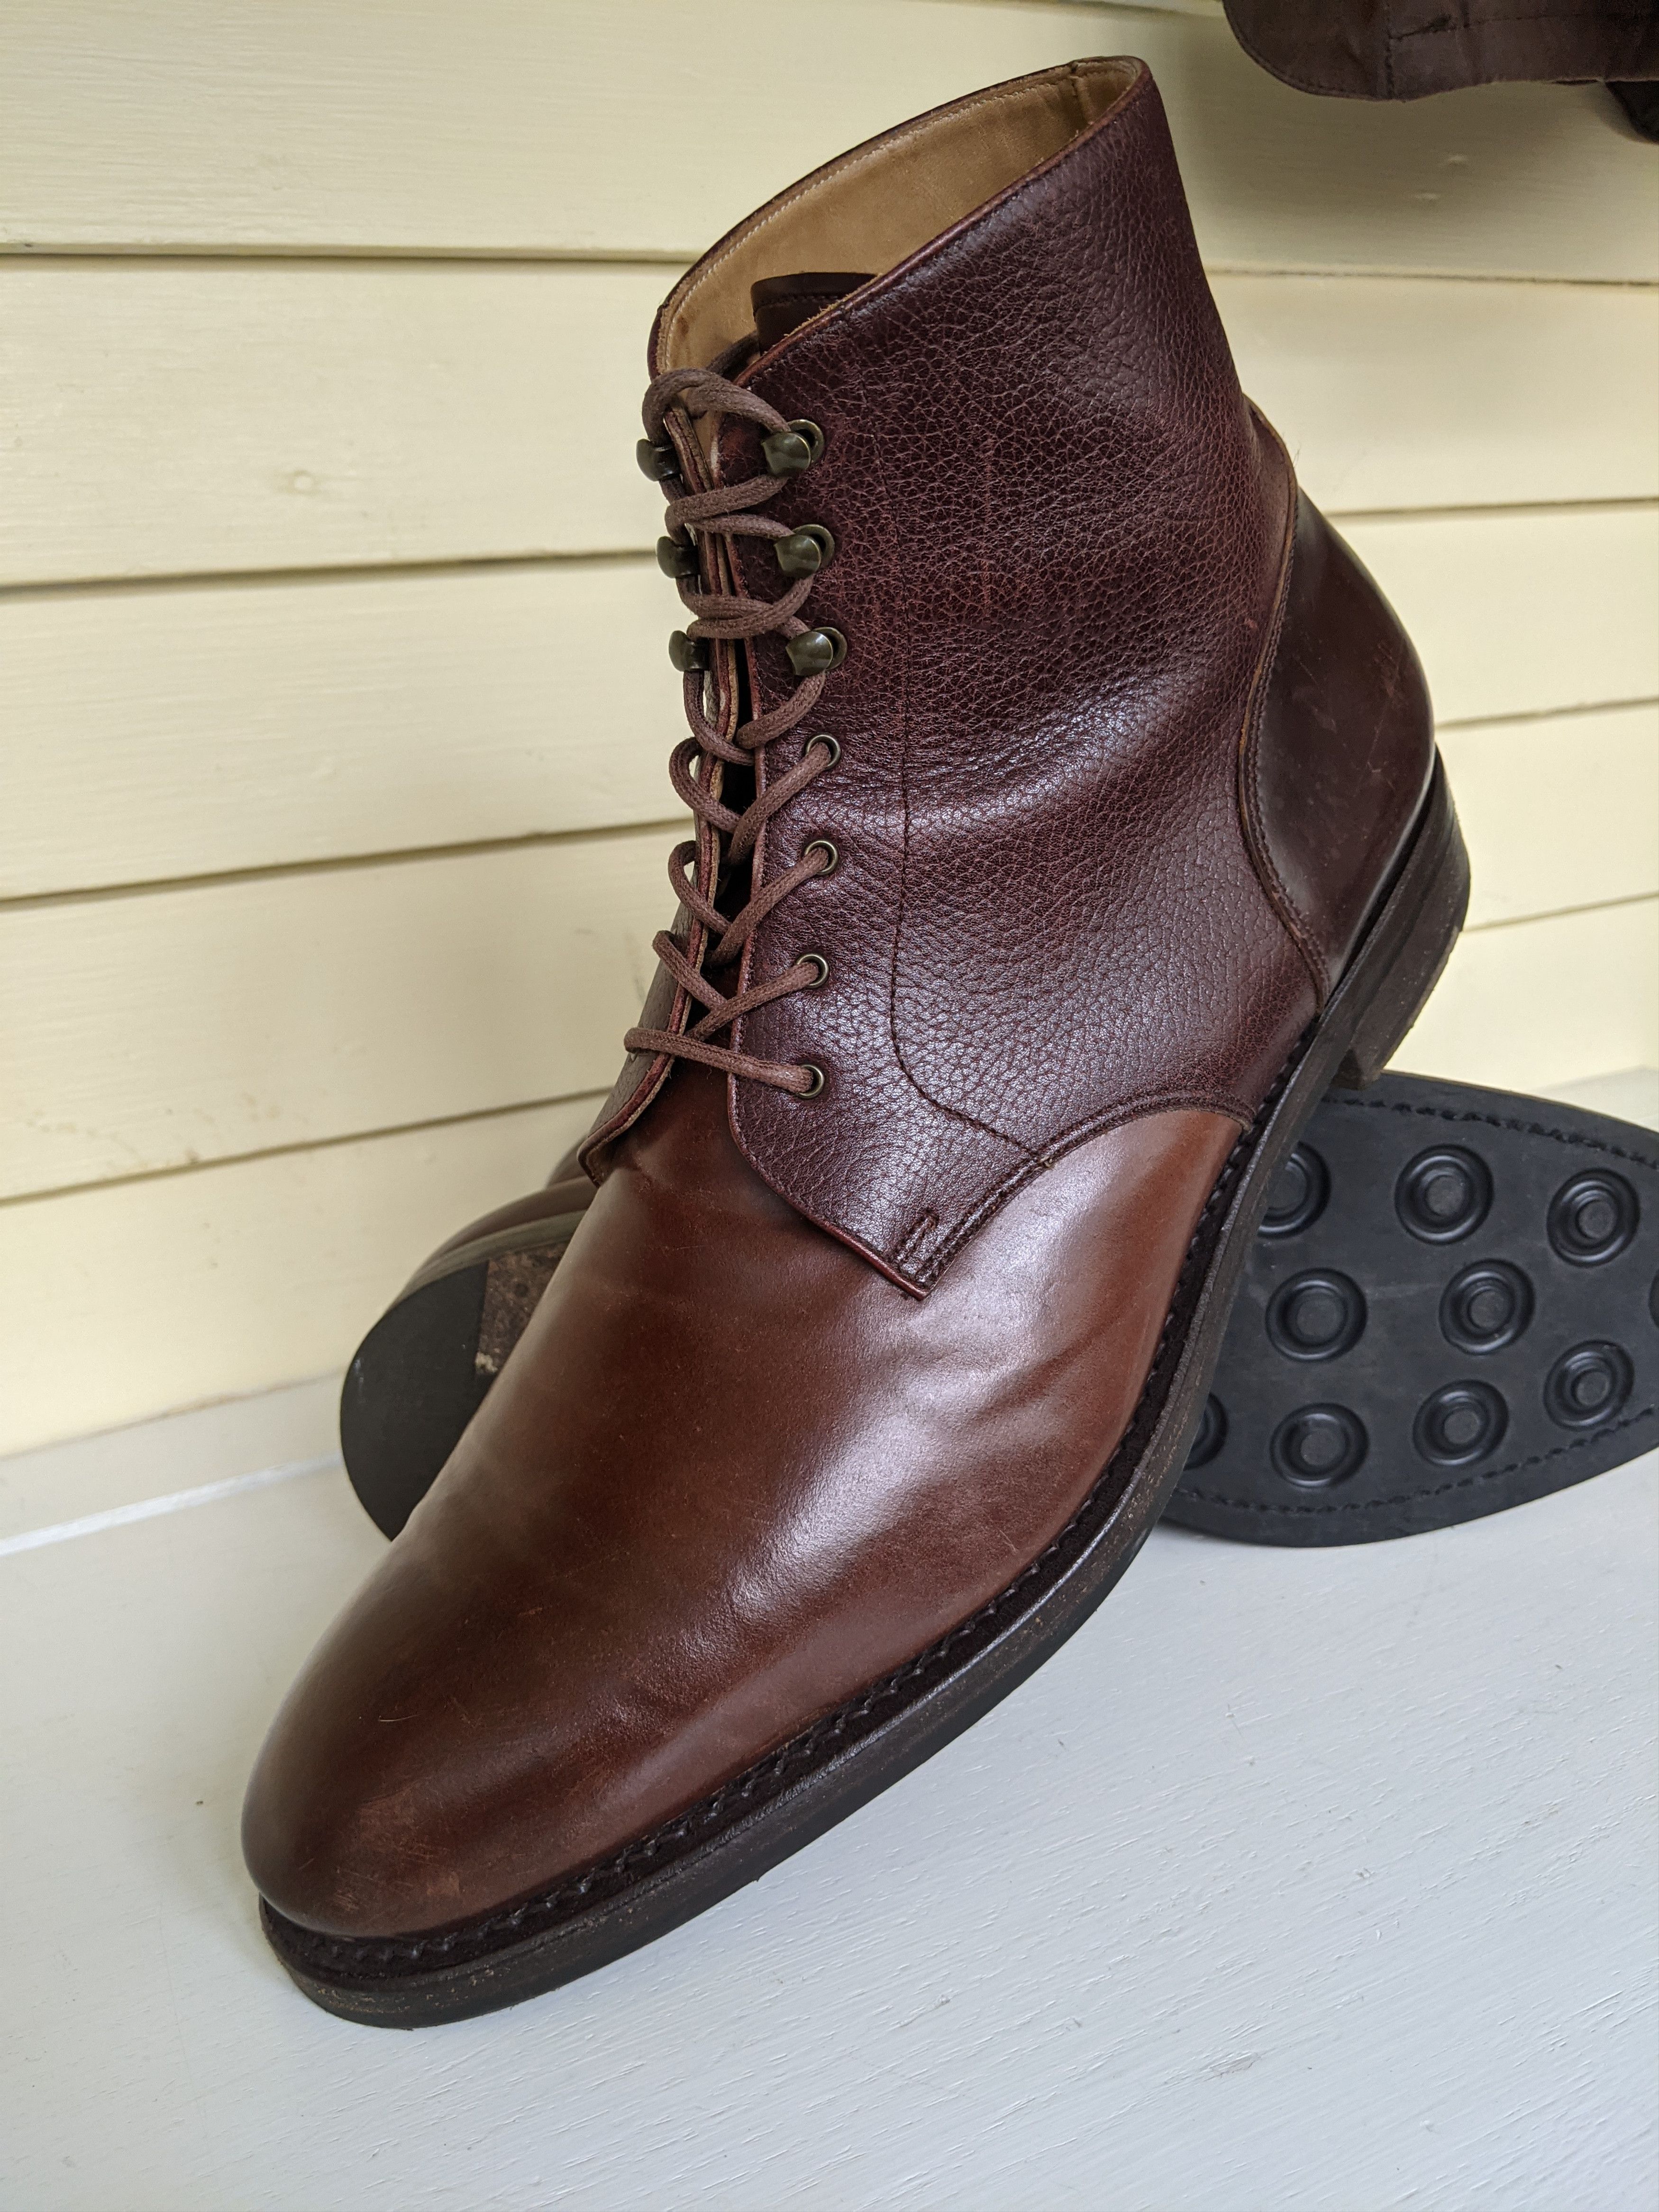 Rider Boot Co. Shell Cordovan Boots Rider Boot Co. 11.5 Size US 11.5 / EU 44-45 - 1 Preview